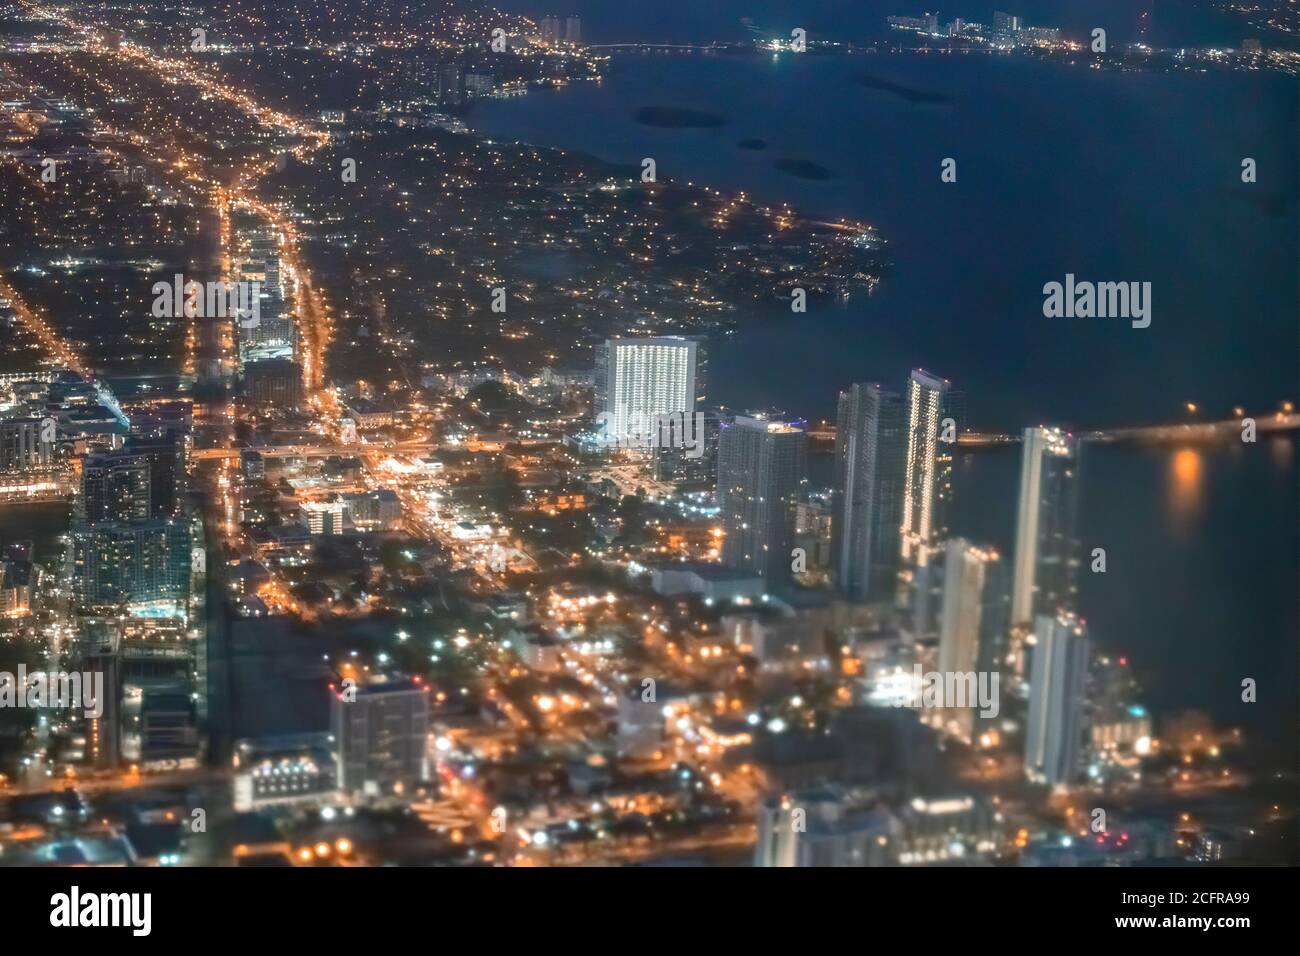 Night Aerial View Of Miami Beach Skyline From The Airplane Stock Photo